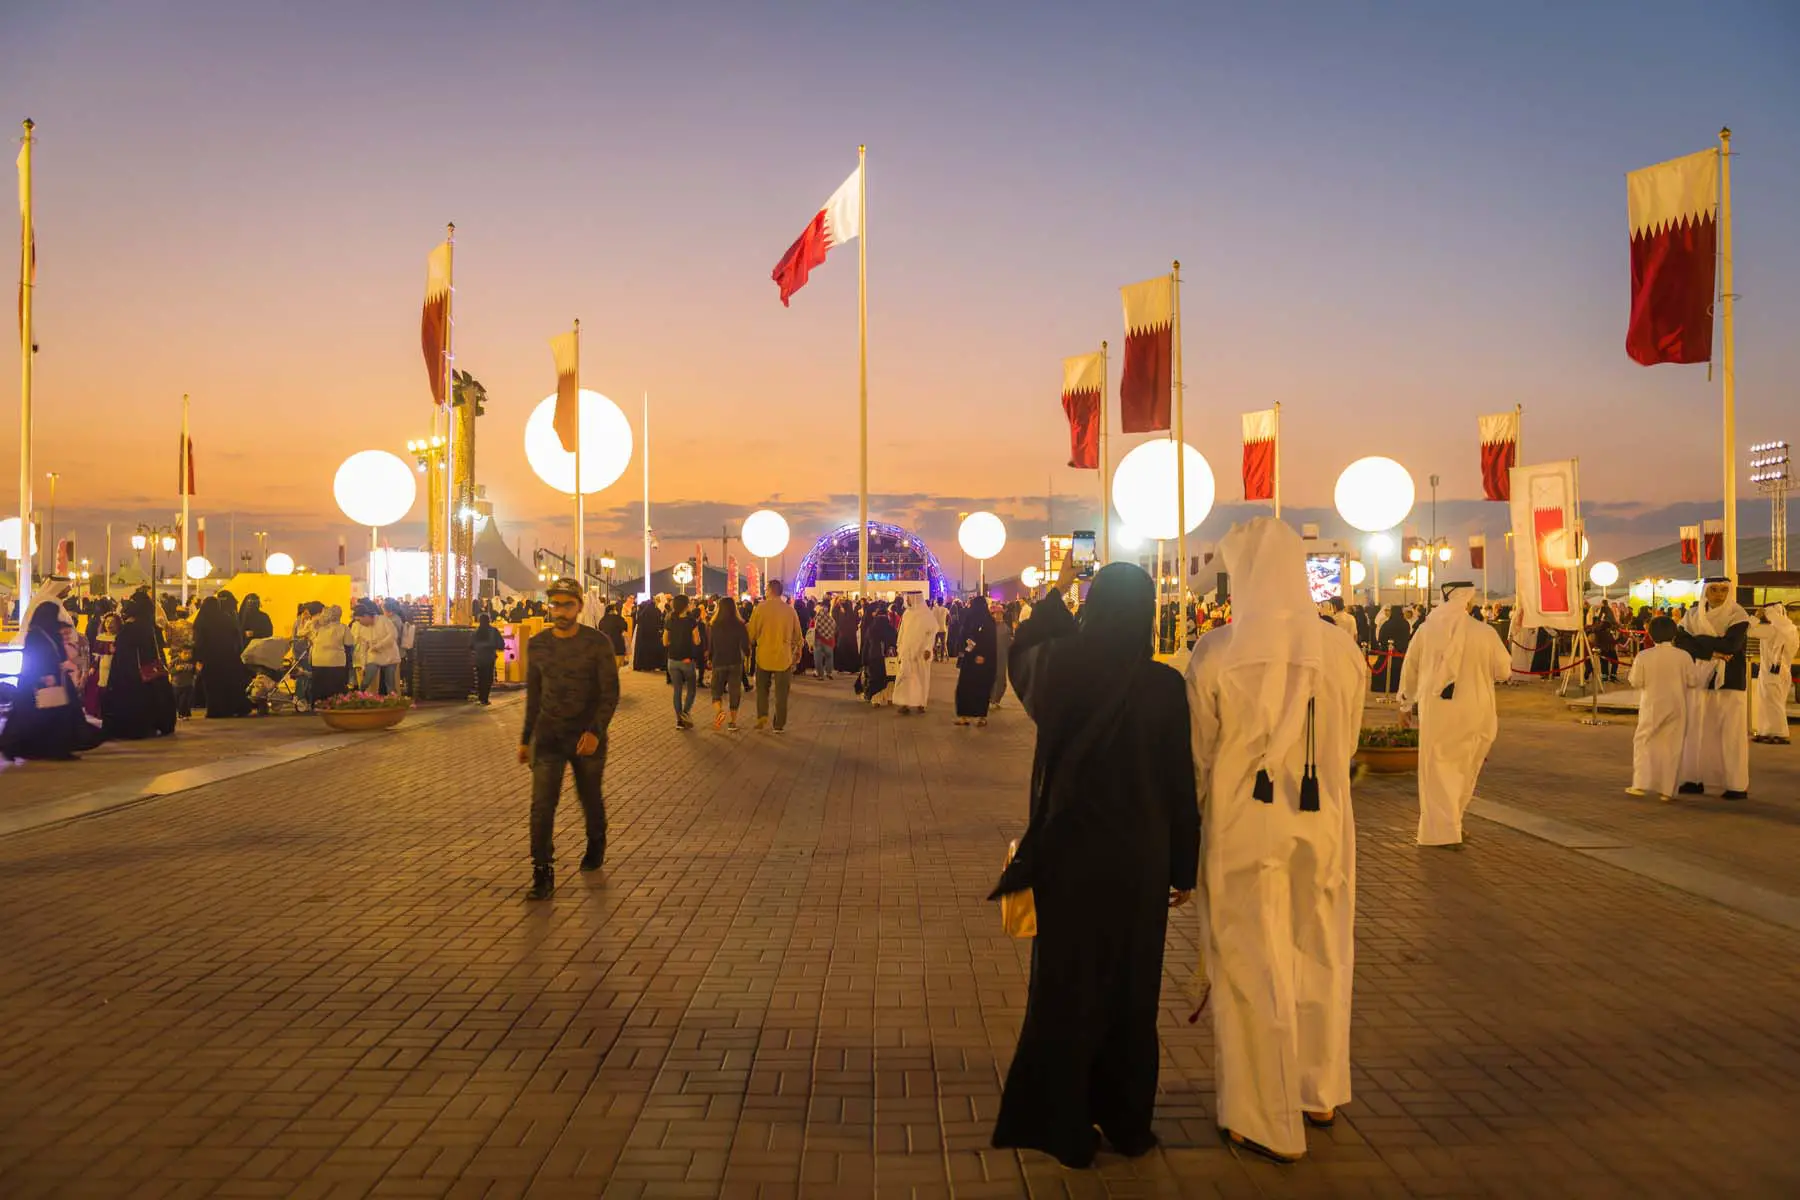 crowds walk through Doha at dusk, the pavement lit with lights.